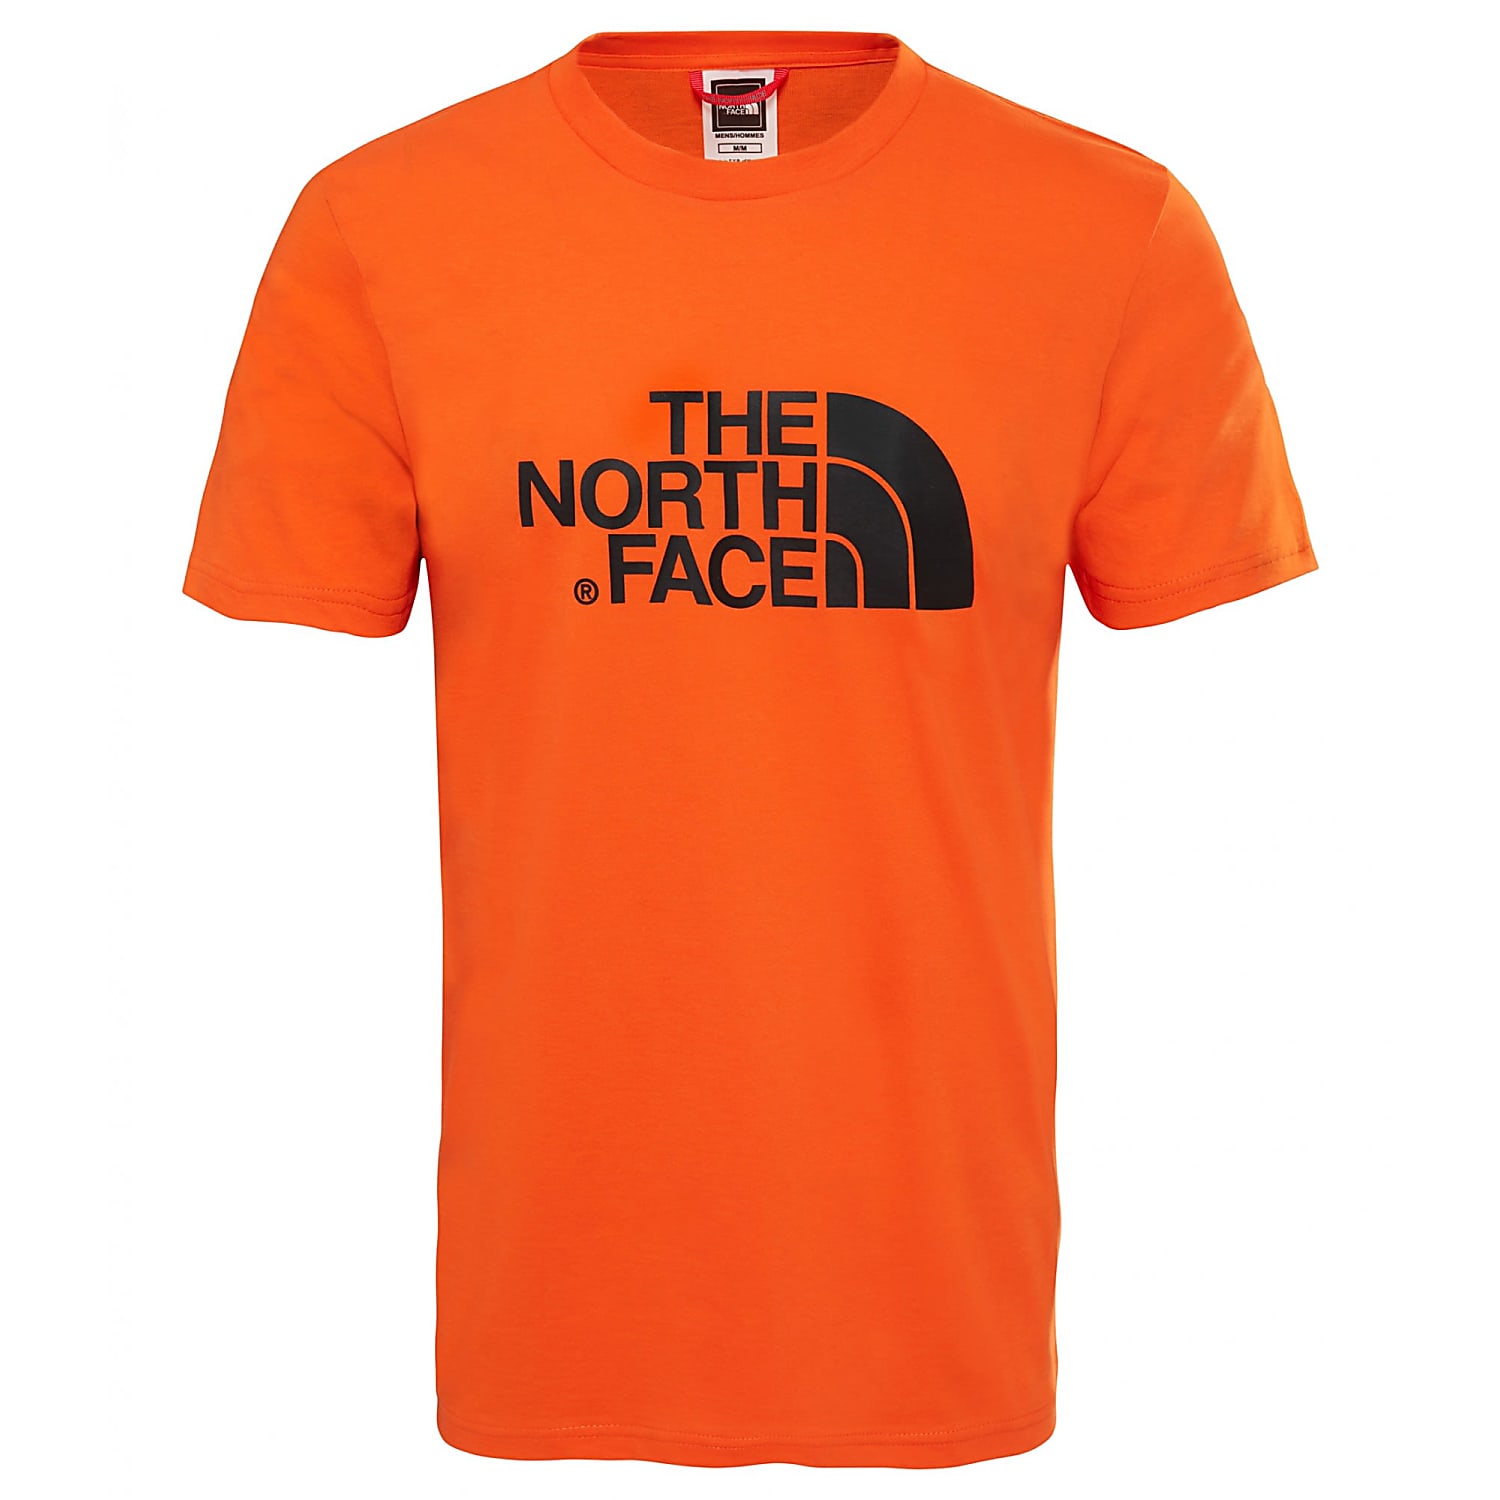 Buy The North Face M S/S EASY TEE, Persian Orange online now - www